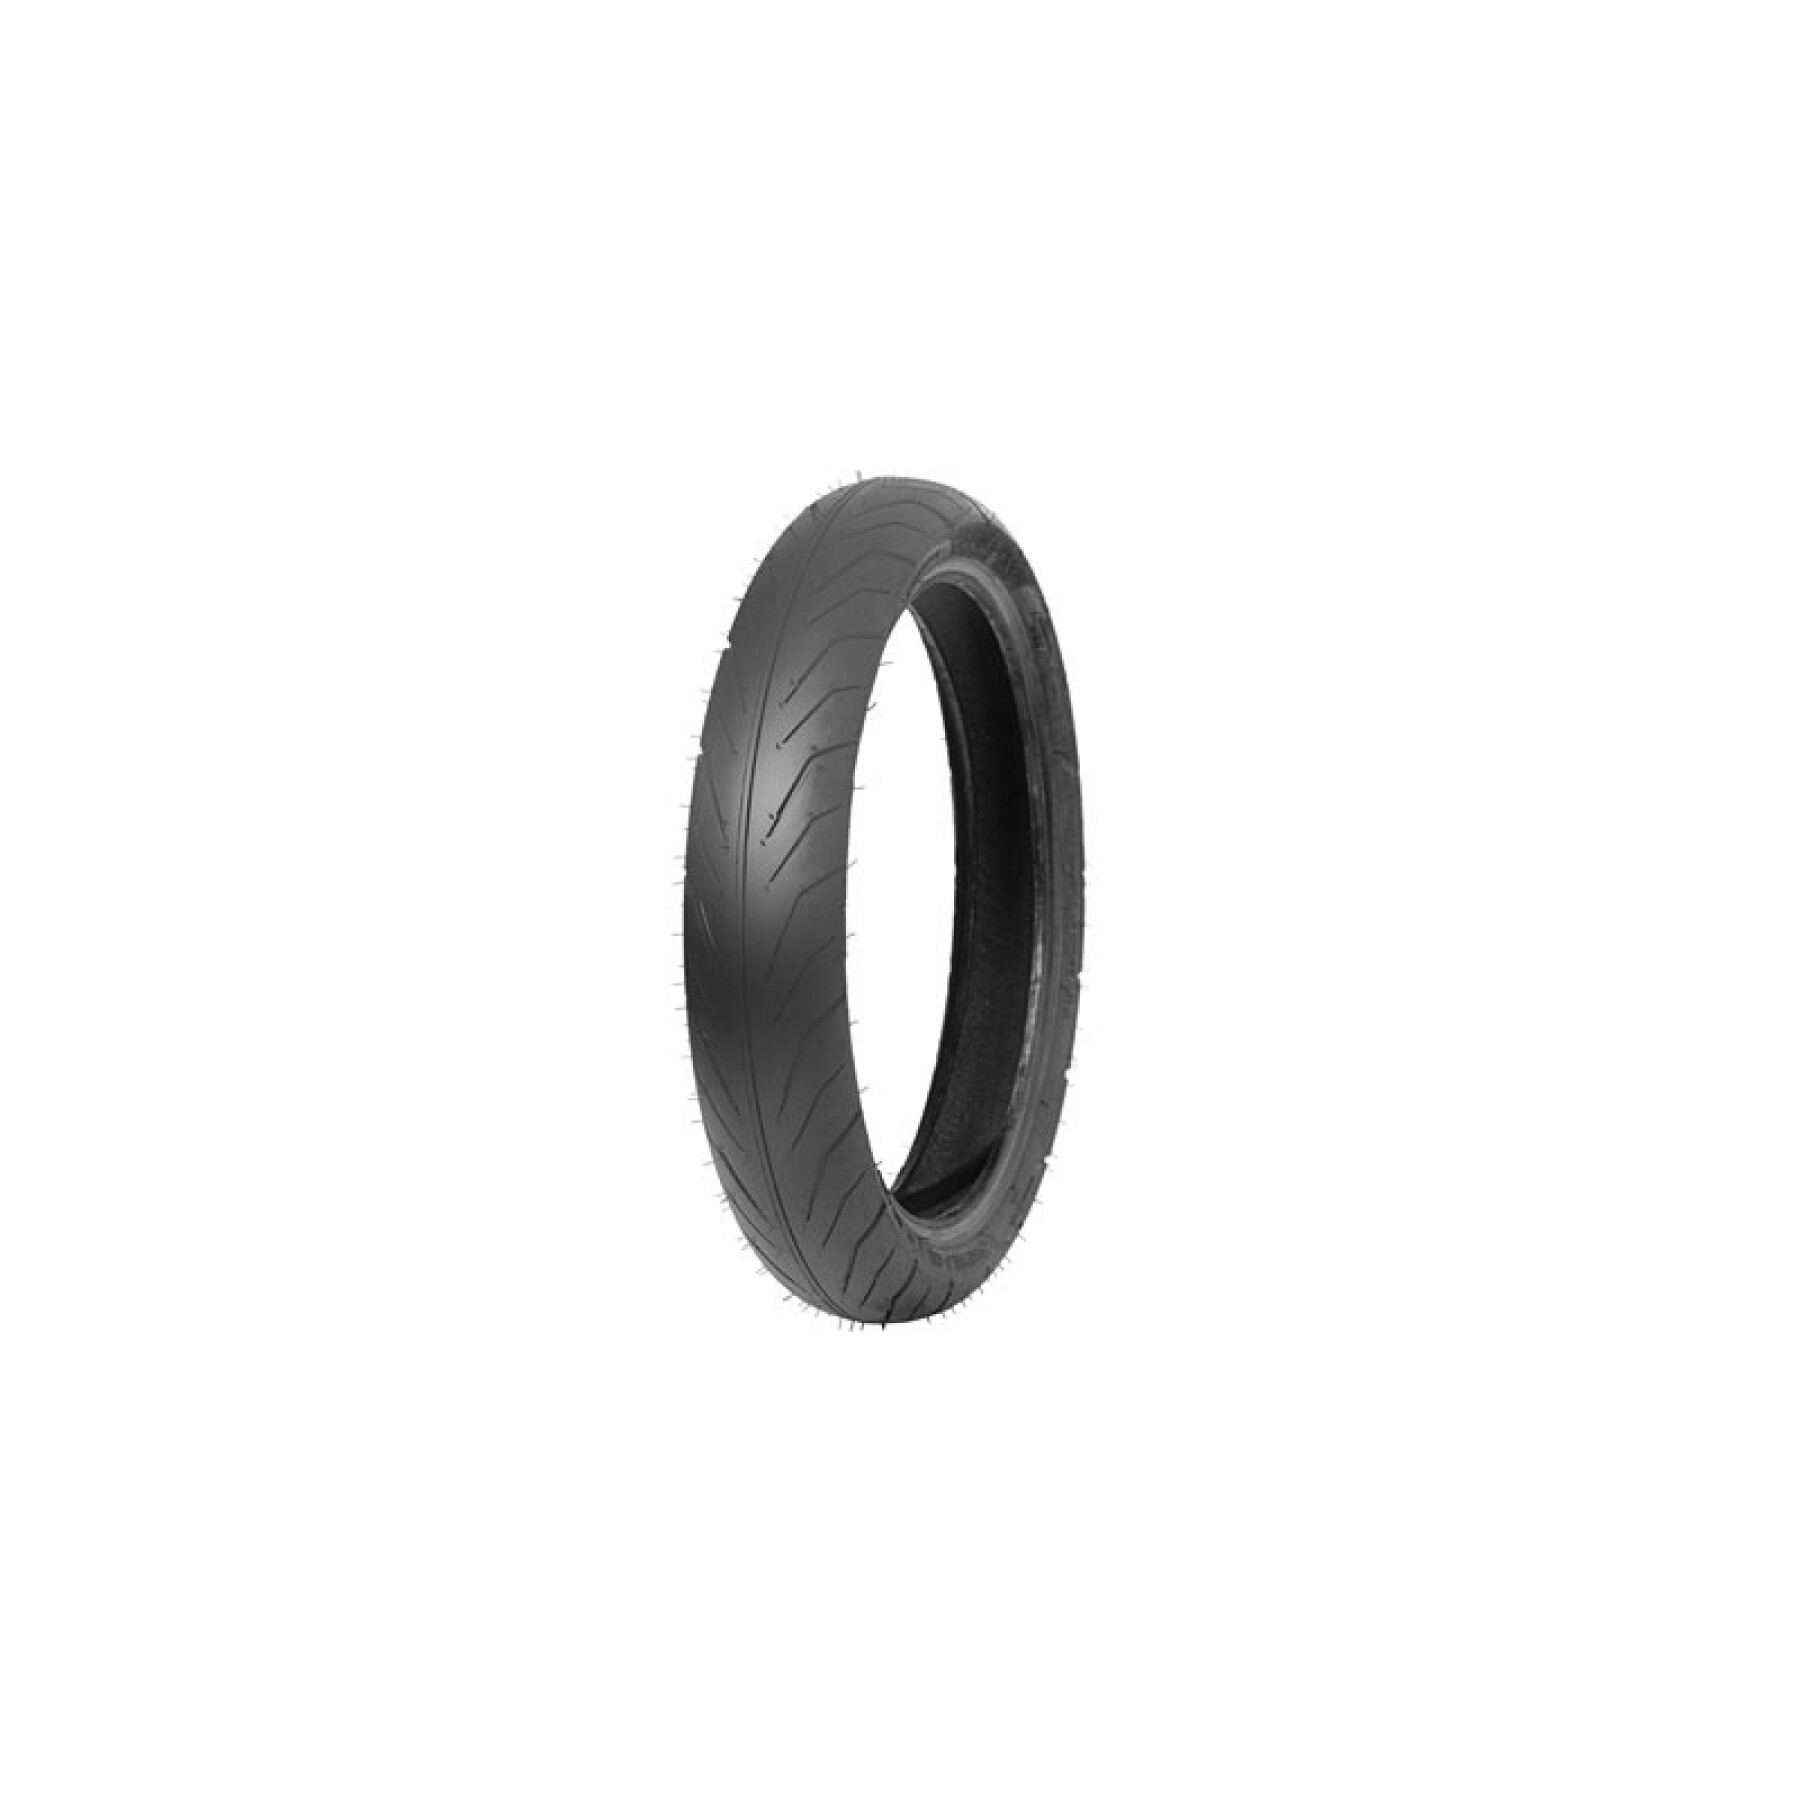 Scooter tires Deli Tire 100-70-14 Thunder Sb-108 Tl 53L Reinf